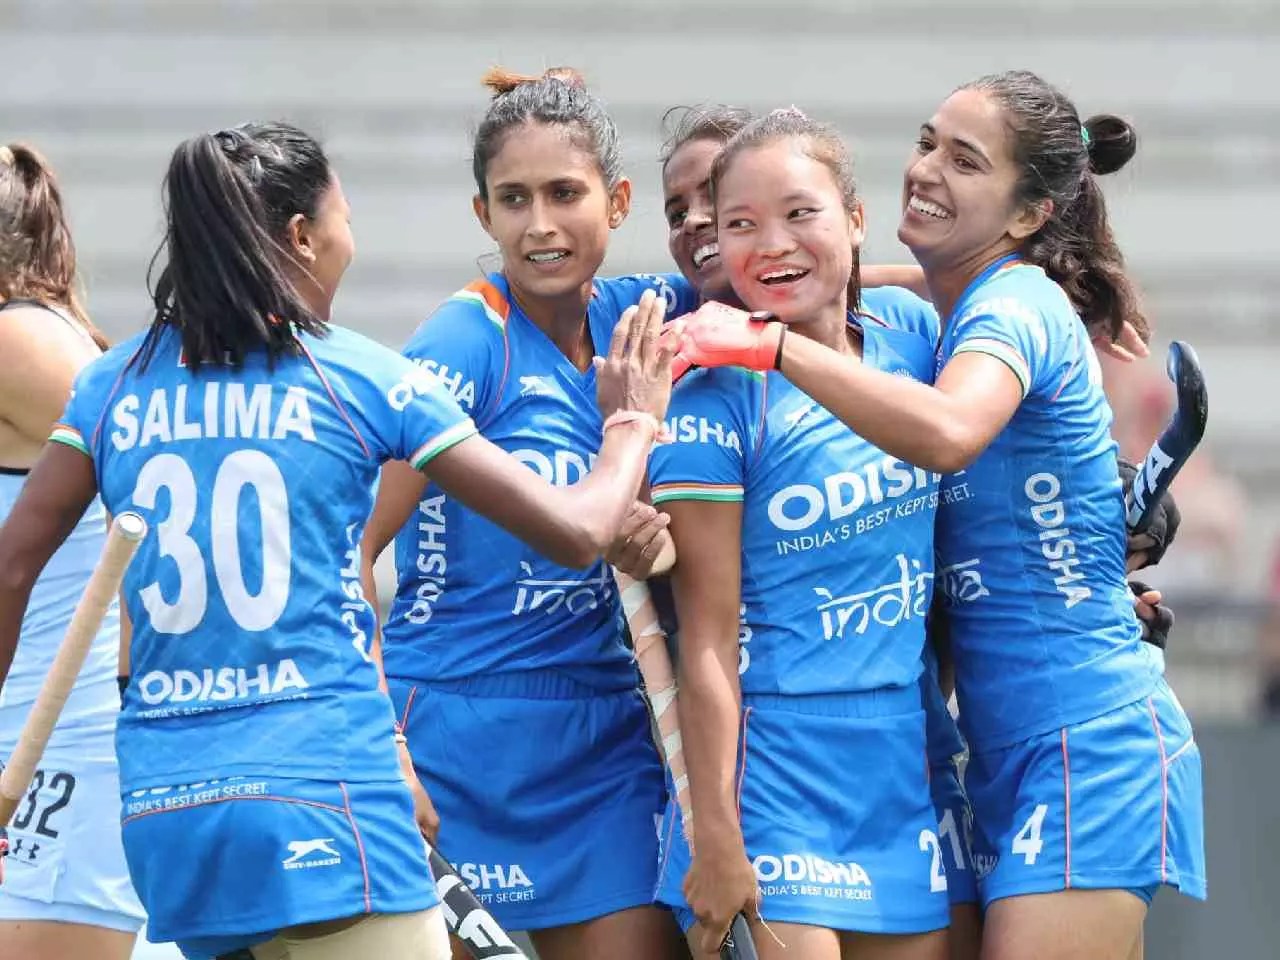 India vs USA Live: India defeat USA 4-0 in final match to seal third spot in Hockey Pro League - Follow FIH Hockey Pro League Highlights